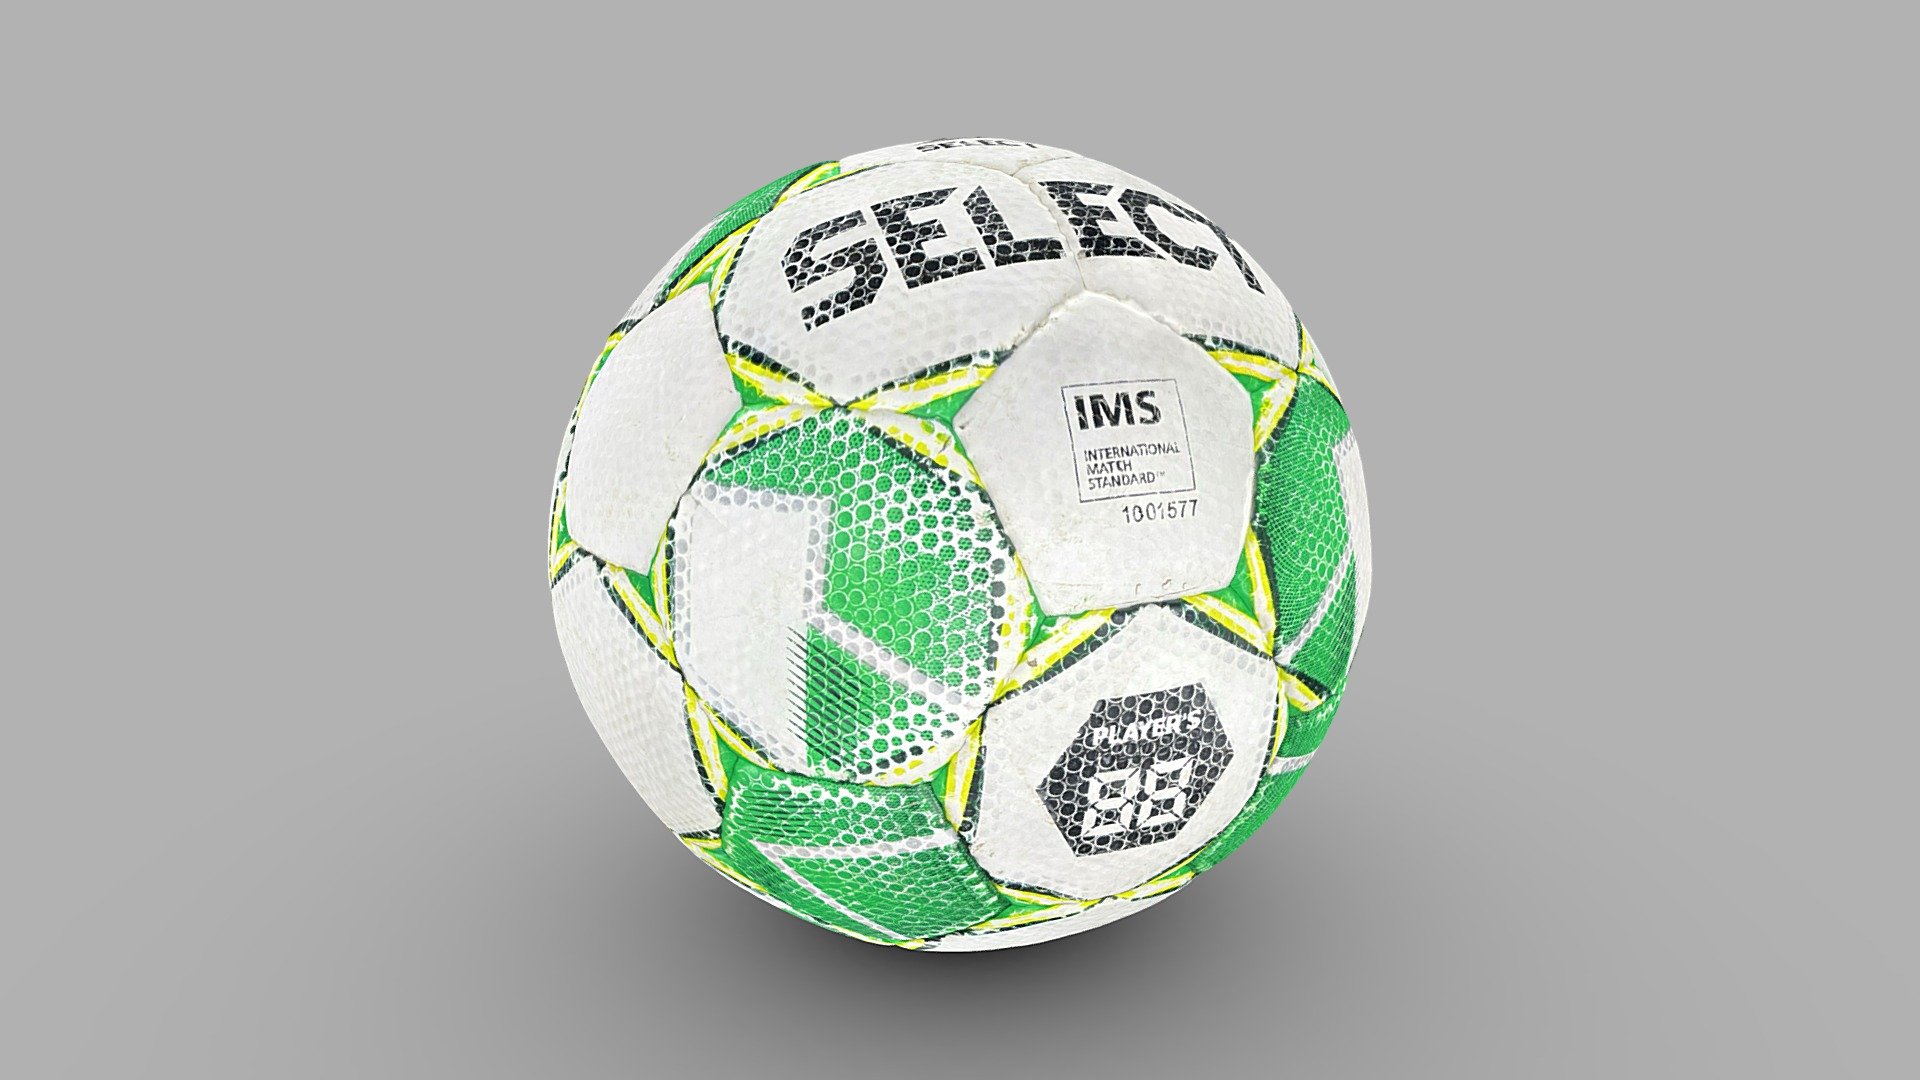 Soccer ball scanned with Trnio plus with object masking using iphone 13pro. I used texture defragmentation in Meshlab to get the texture into 1 image, reduced the mesh, and baked it into a single 8k texture in Blender.

Download also includes the original scan as exported from Trnio 3d model